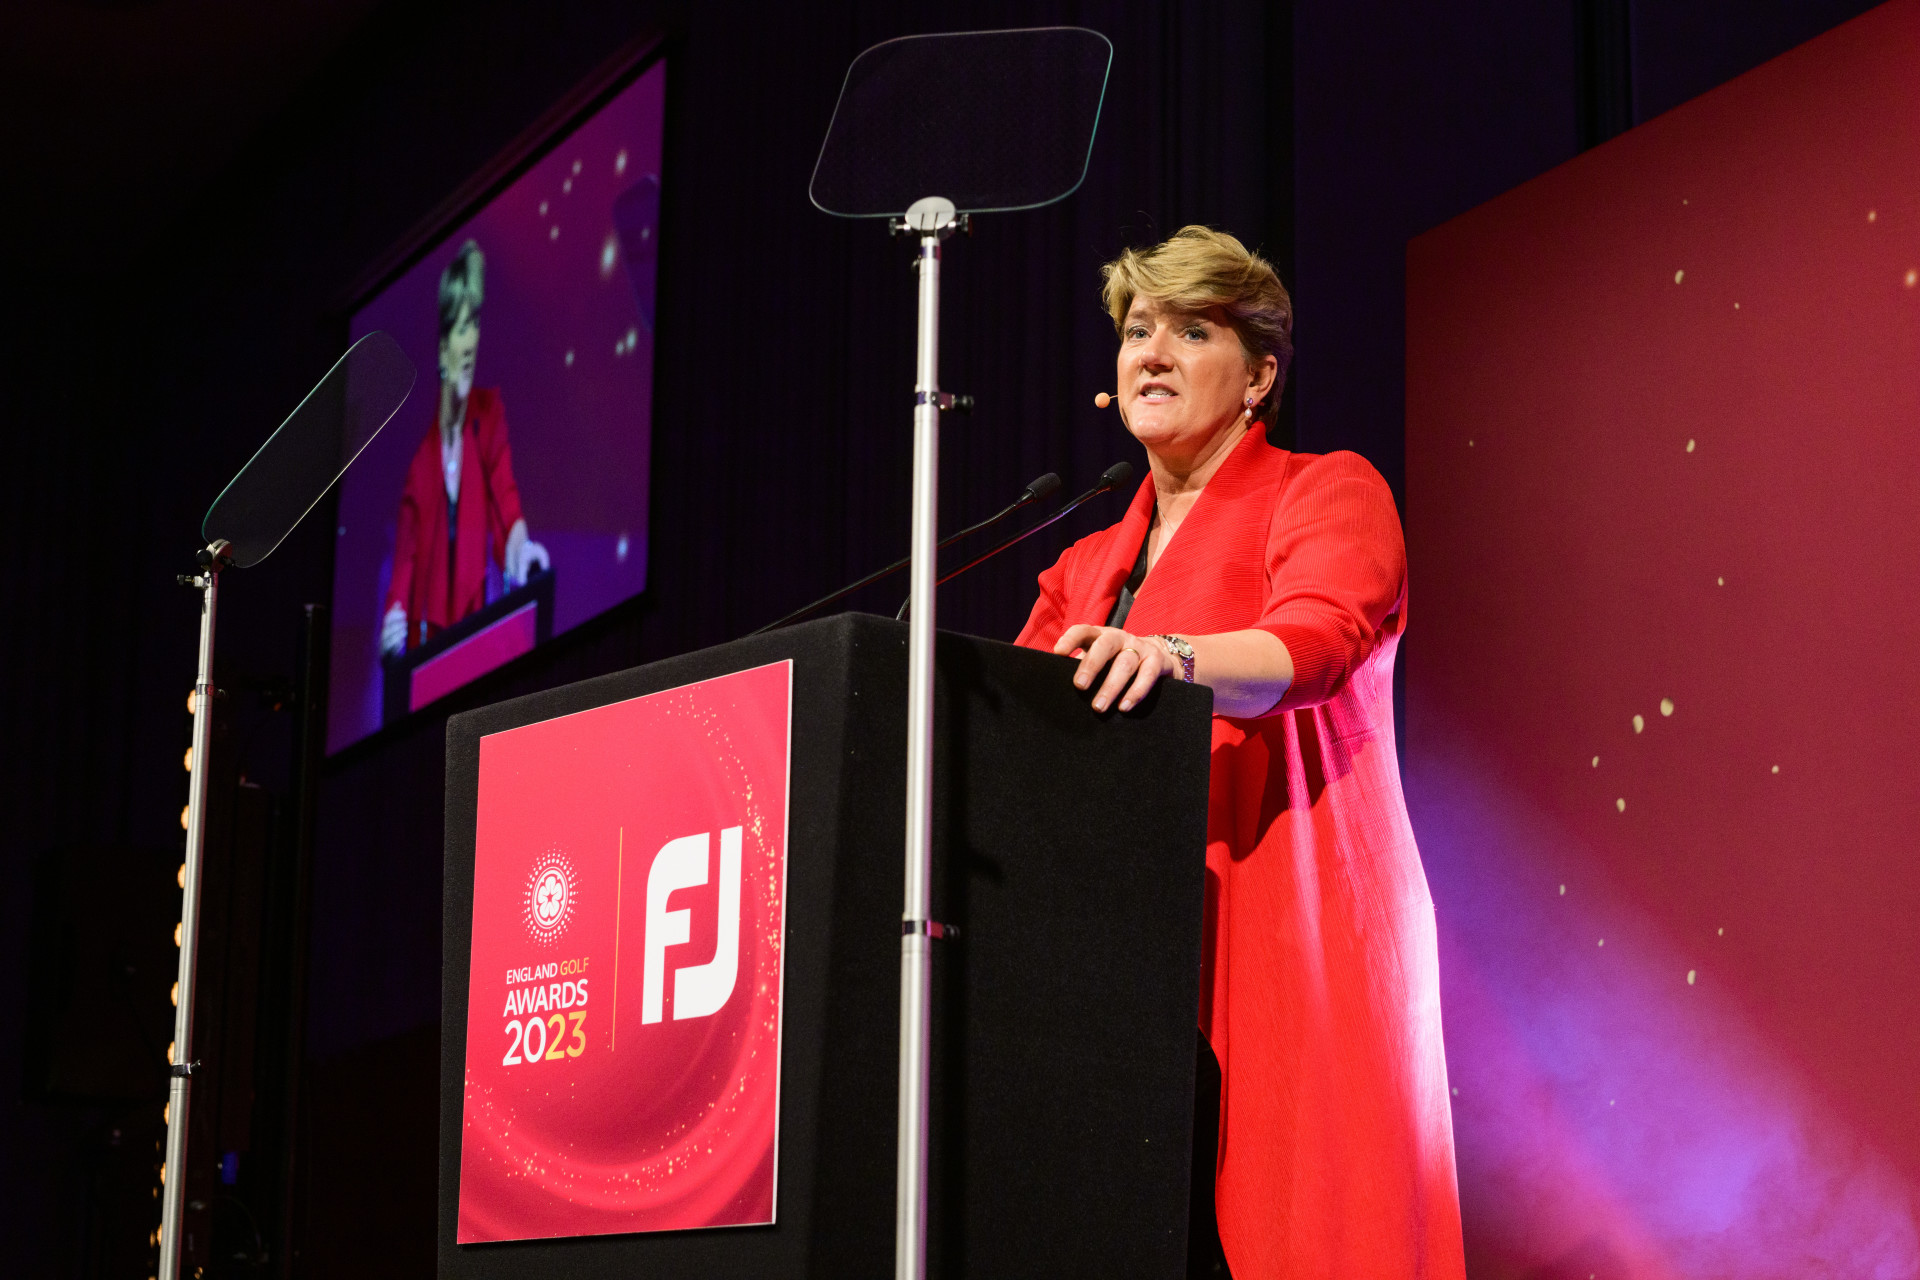 Clare Balding, famous sports broadcaster, hosting the England Golf Awards 2023.